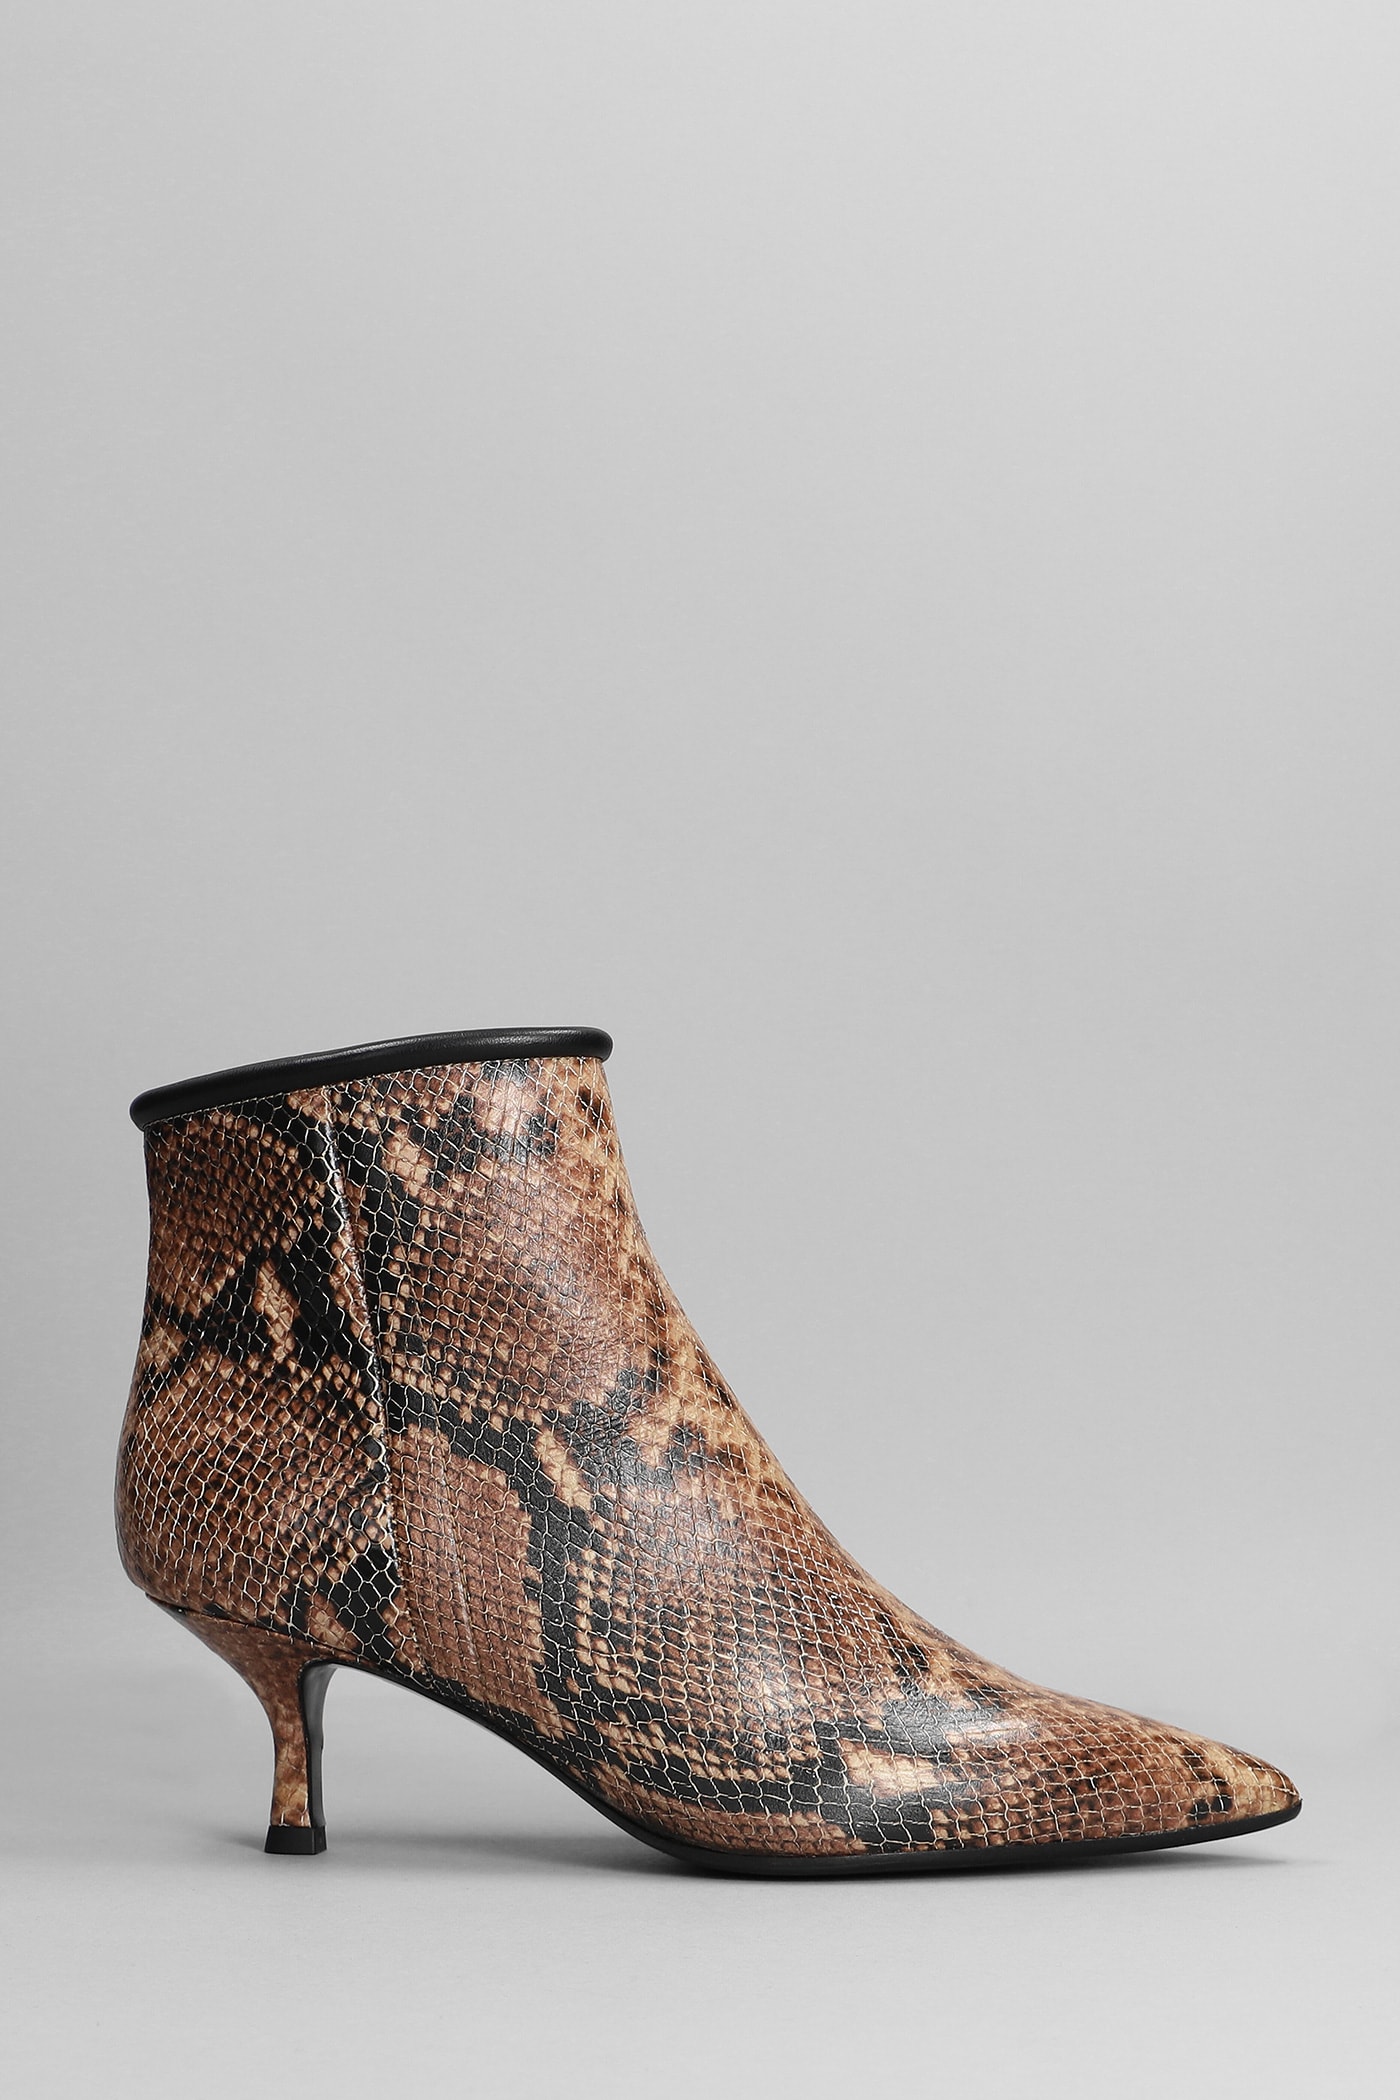 Fabio Rusconi High Heels Ankle Boots In Python Print Leather